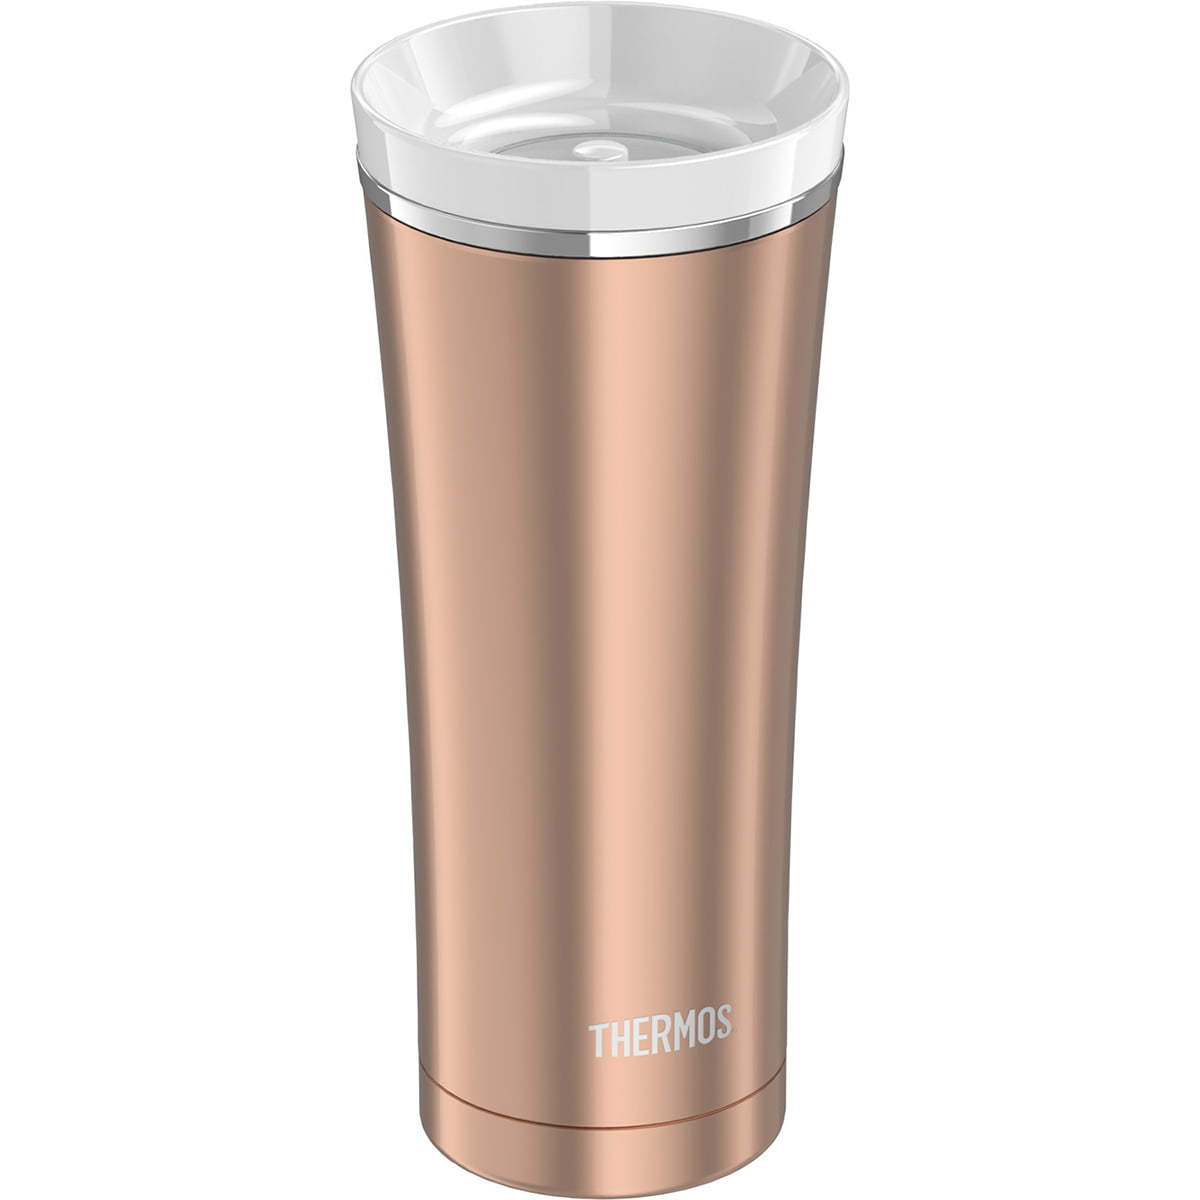 Thermos Ns1056rg4 16 ounce Sipp Stainless Steel Travel Tumbler rose Gold 